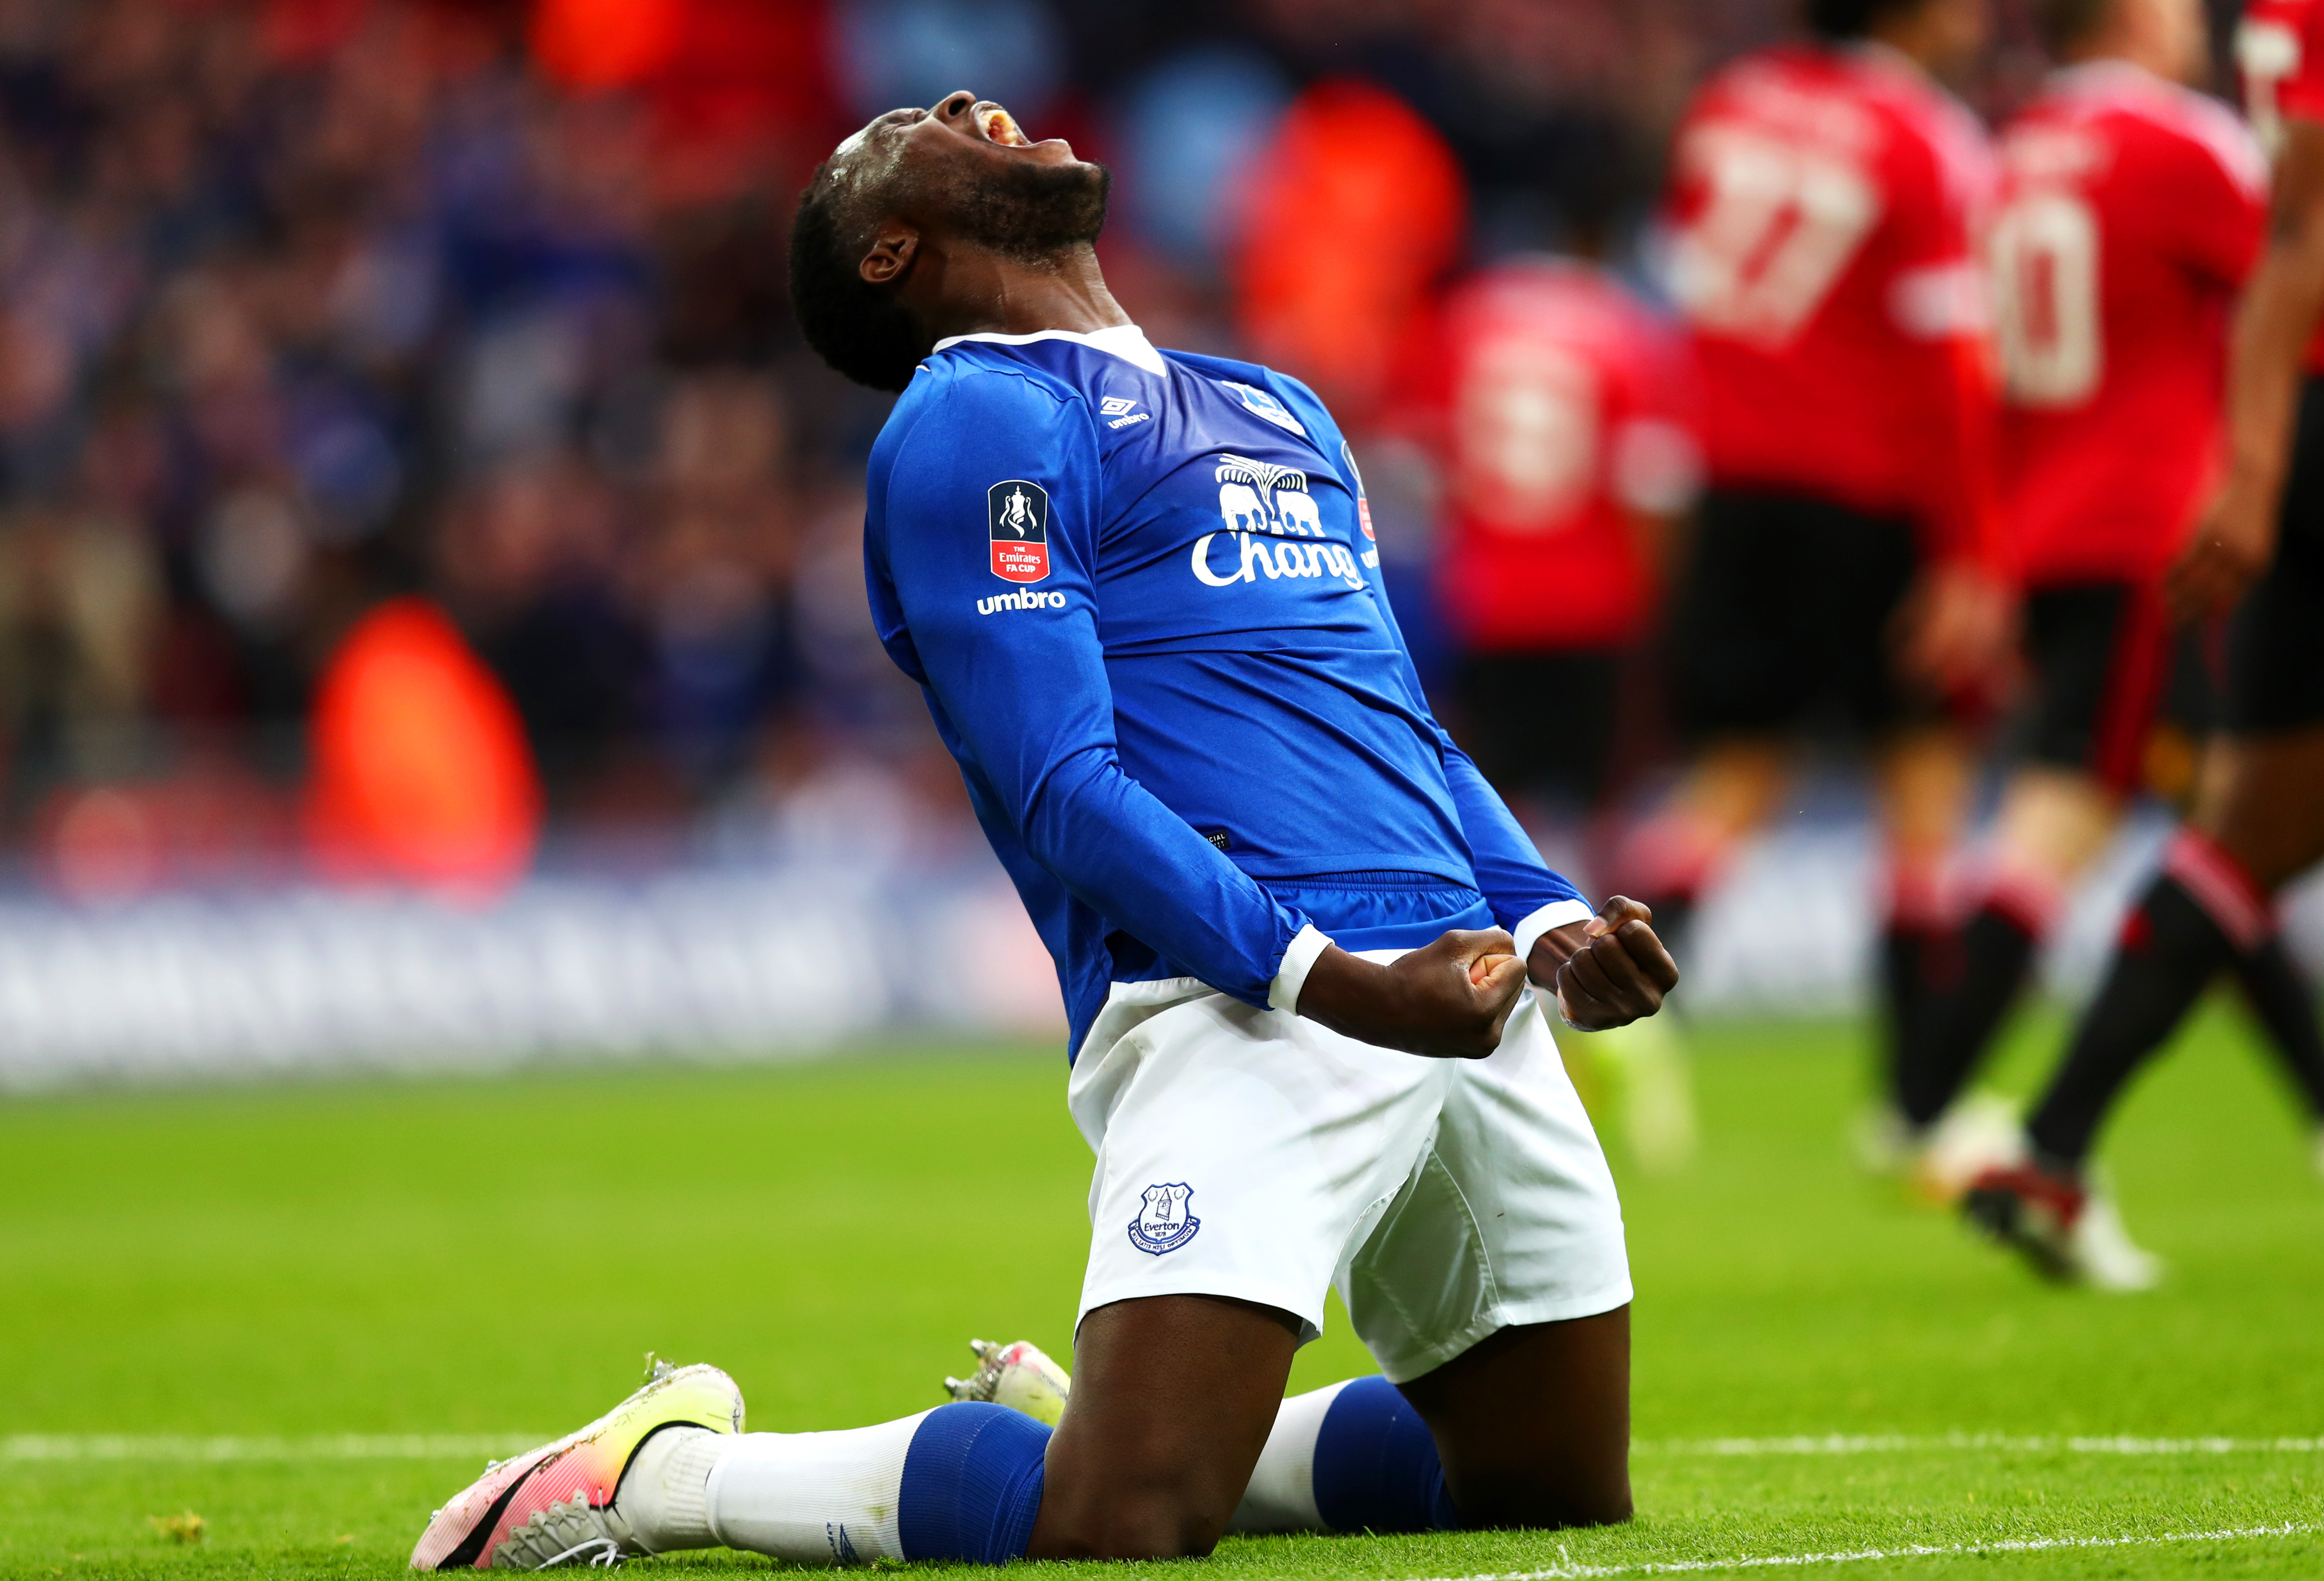 Everton vs Crystal Palace Live Stream: Watch EPL Matches Online